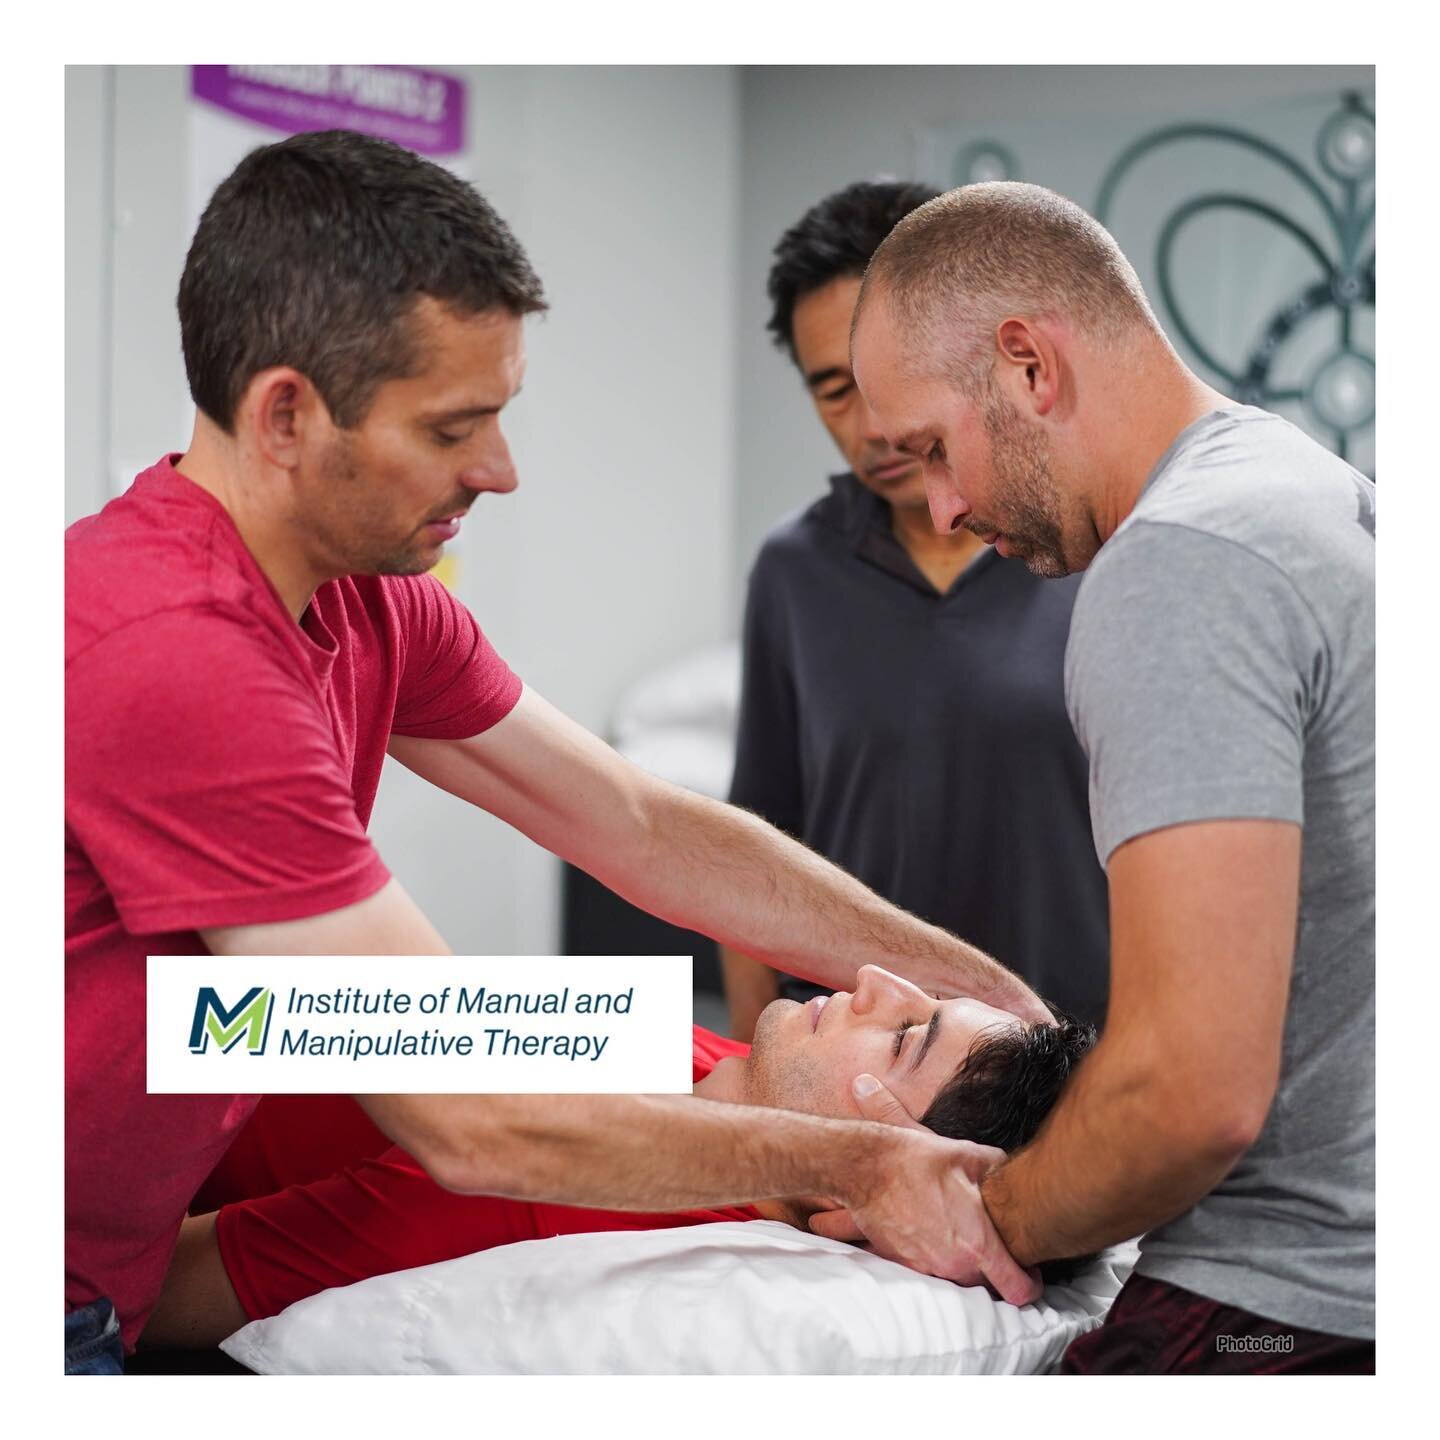 ✅ We&rsquo;re excited to host an adjusting/manipulation course here in Upland! 

✅ If you&rsquo;re looking to add or refine your manual therapy skills, come join and let&rsquo;s learn together! 👐🏽

WHO: DCs, PTs, ATCs*
WHEN: February 25-26, 2023
WH